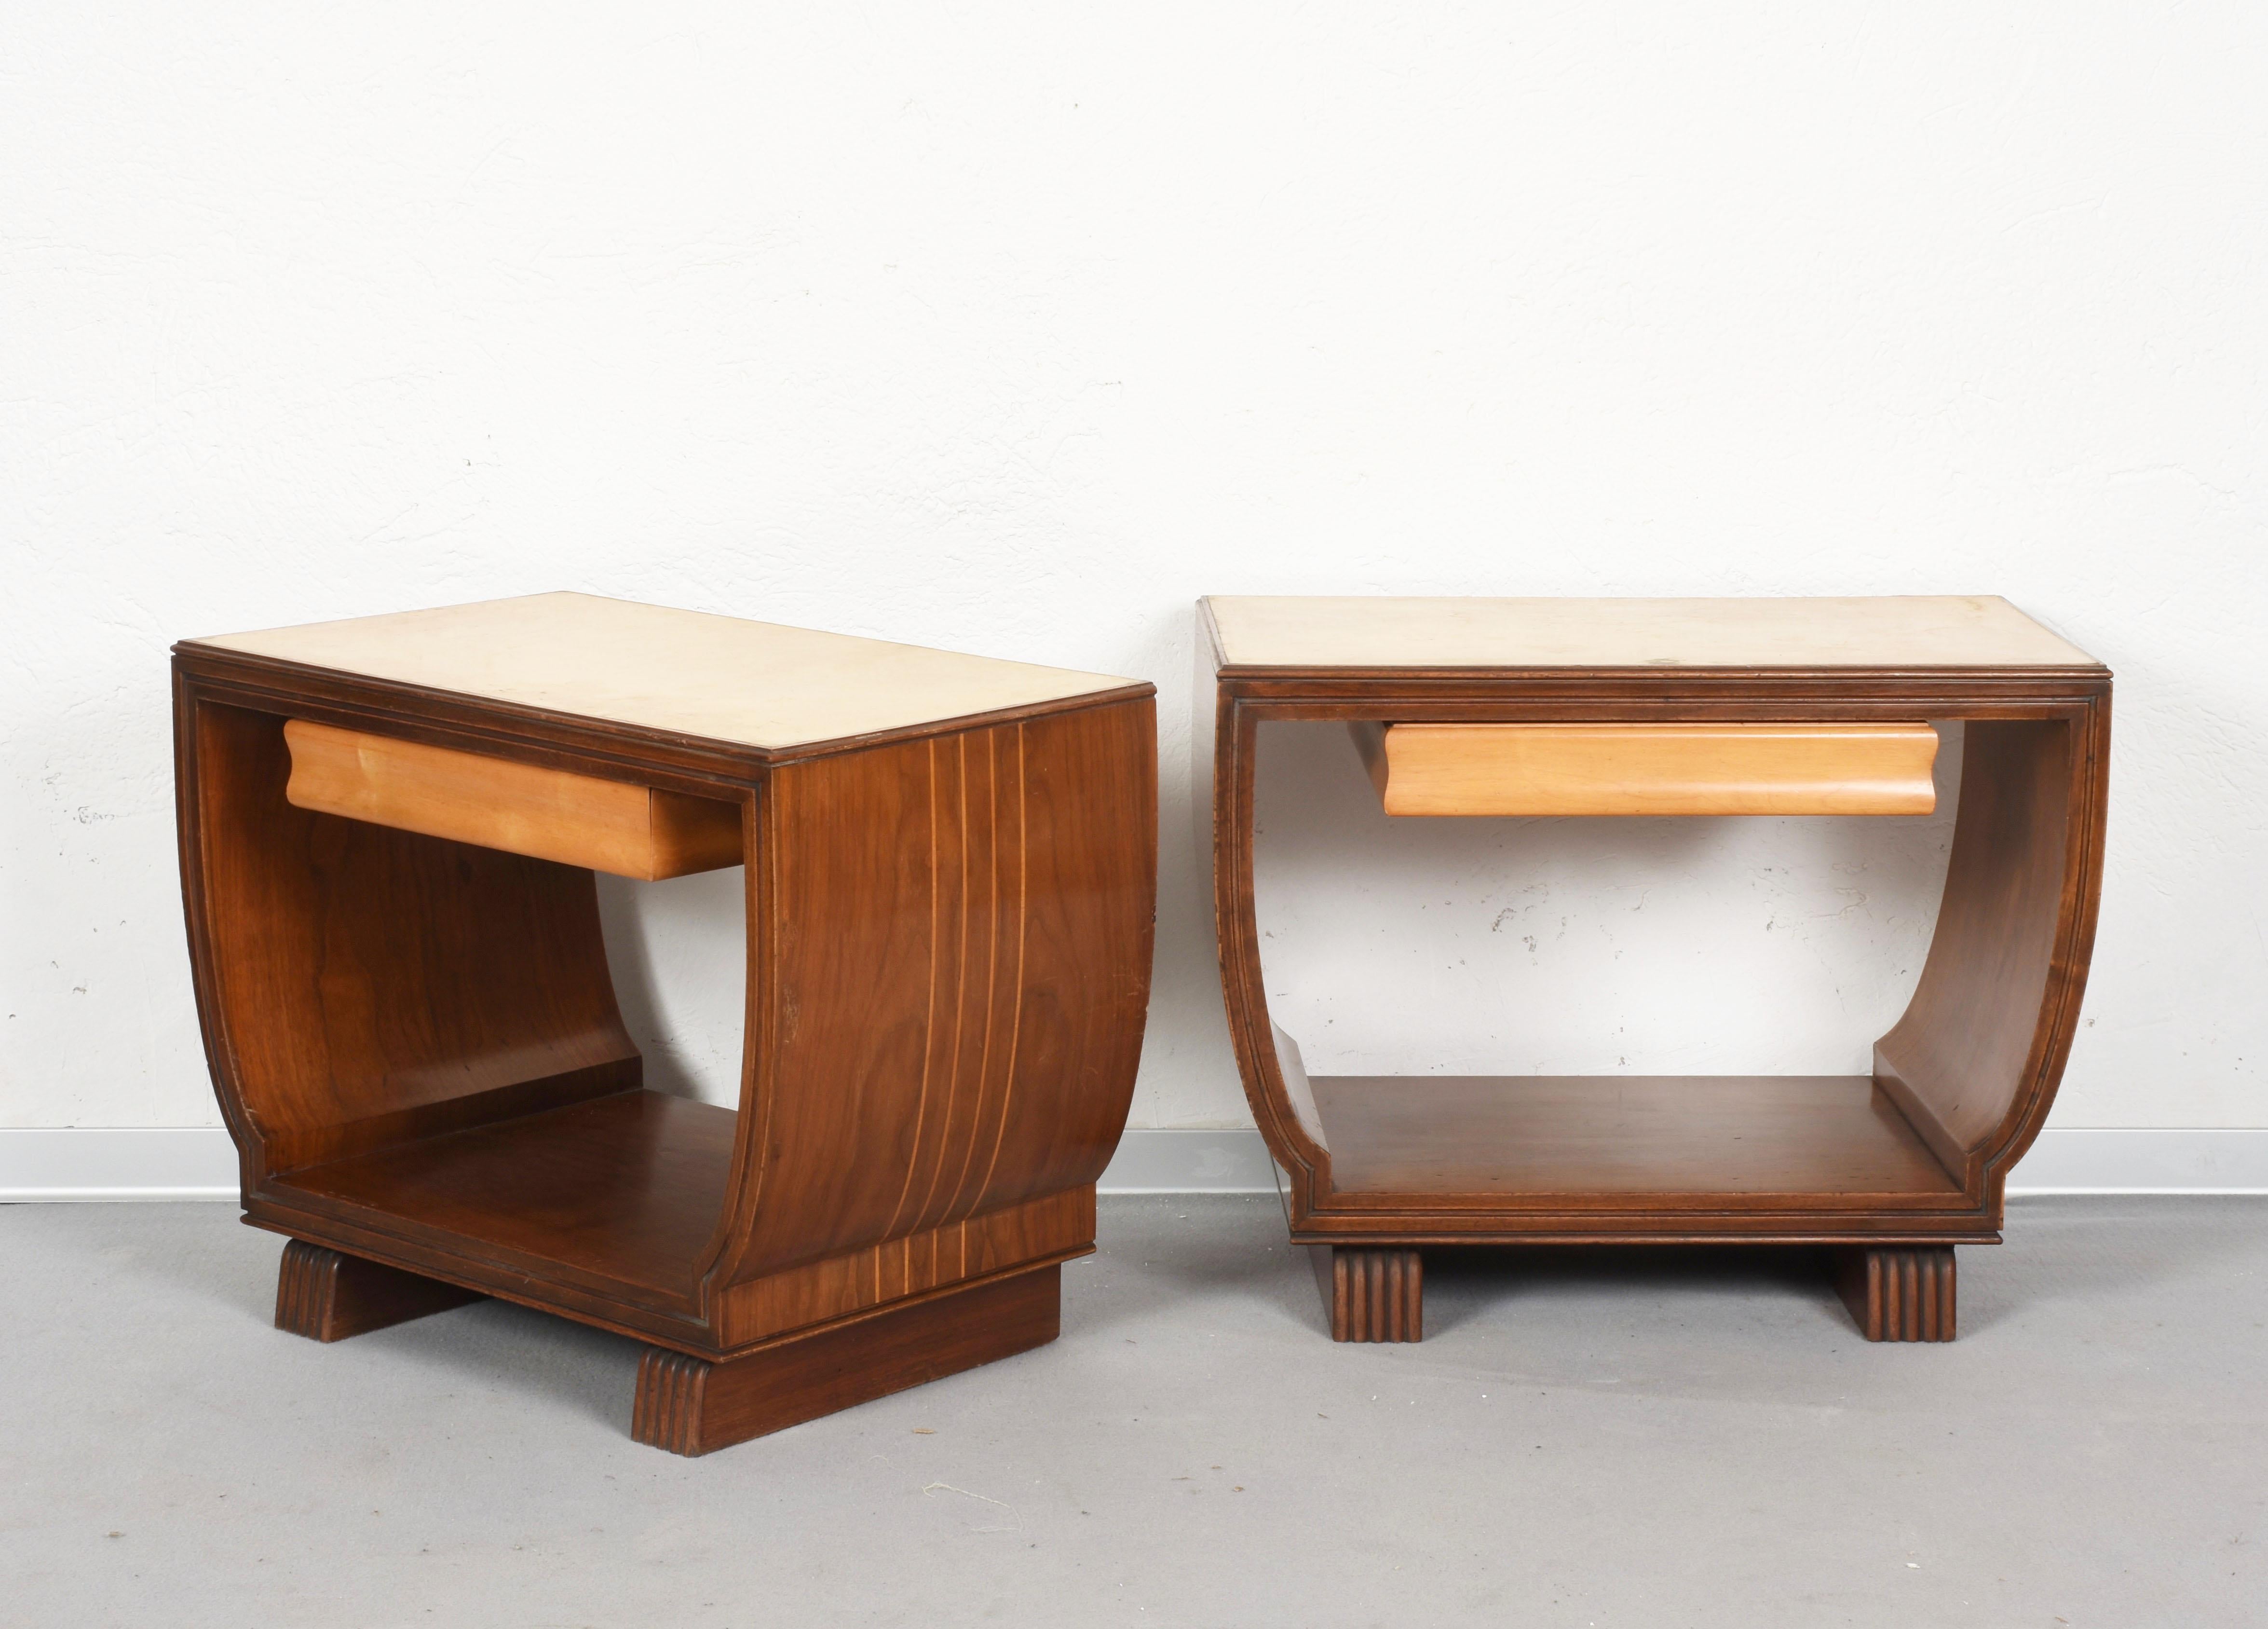 Pair of Italian bedside tables by Valzania made in Italy in the 1930s. Top covered with parchment.
These beautiful bedside tables are attributable to Guglielmo Ulrich.